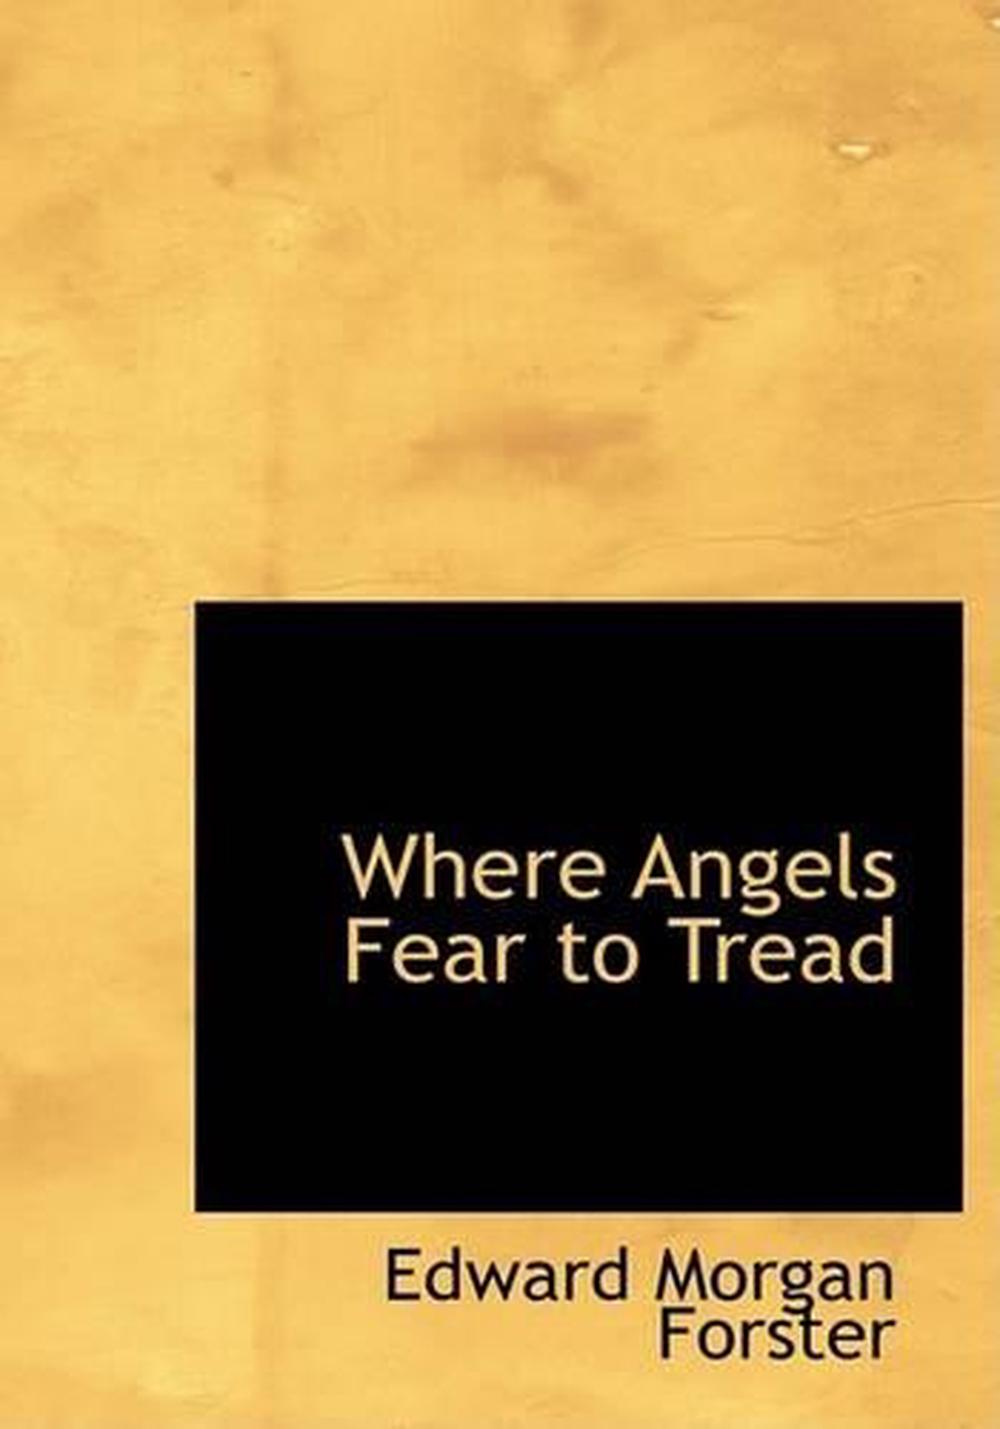 em forster where angels fear to tread